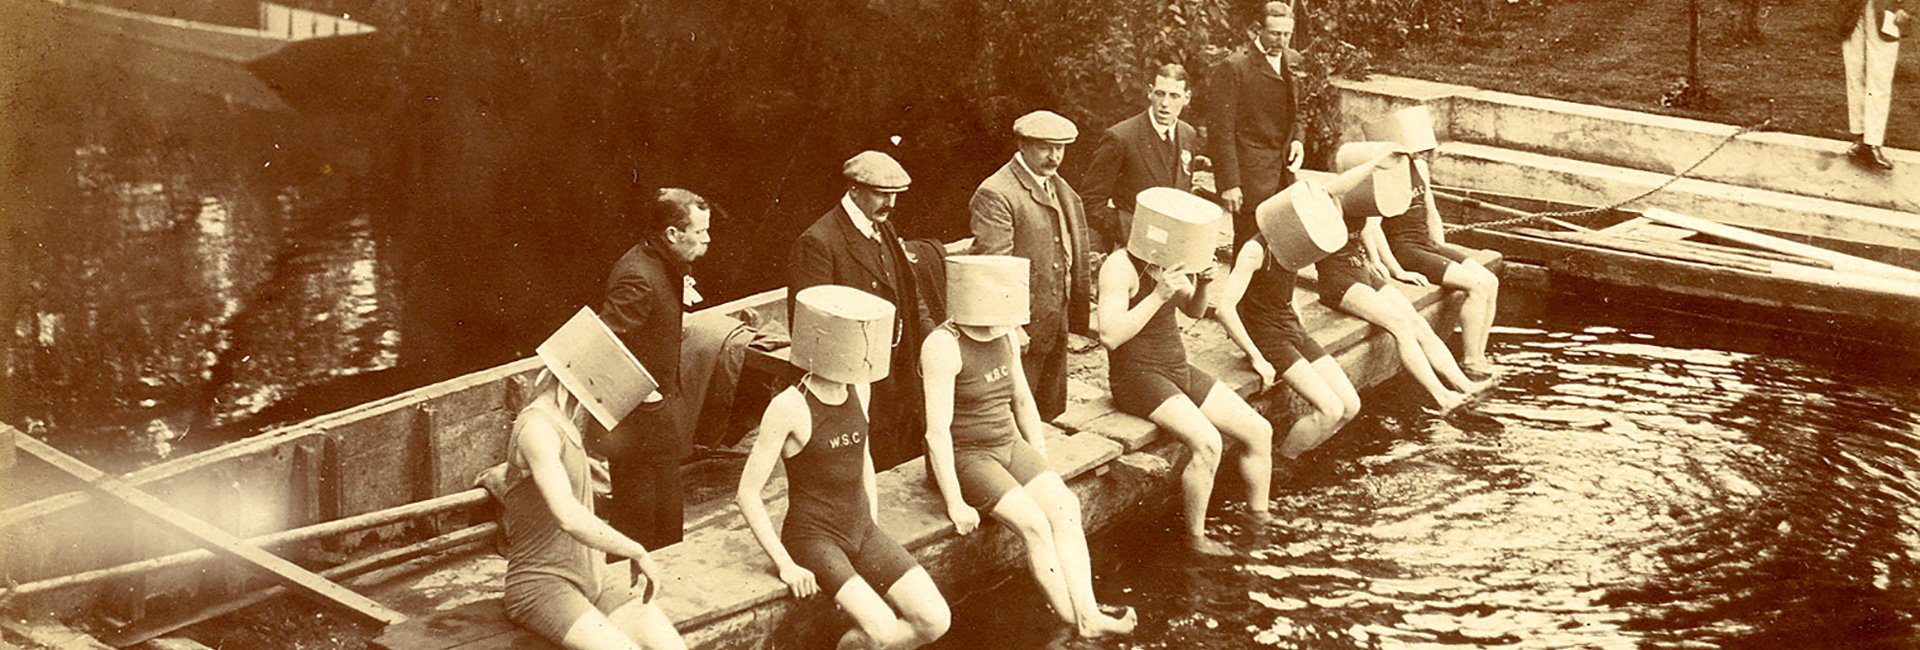 Swimmers sit with buckets on their heads c.1910 ref. WI/D194/1